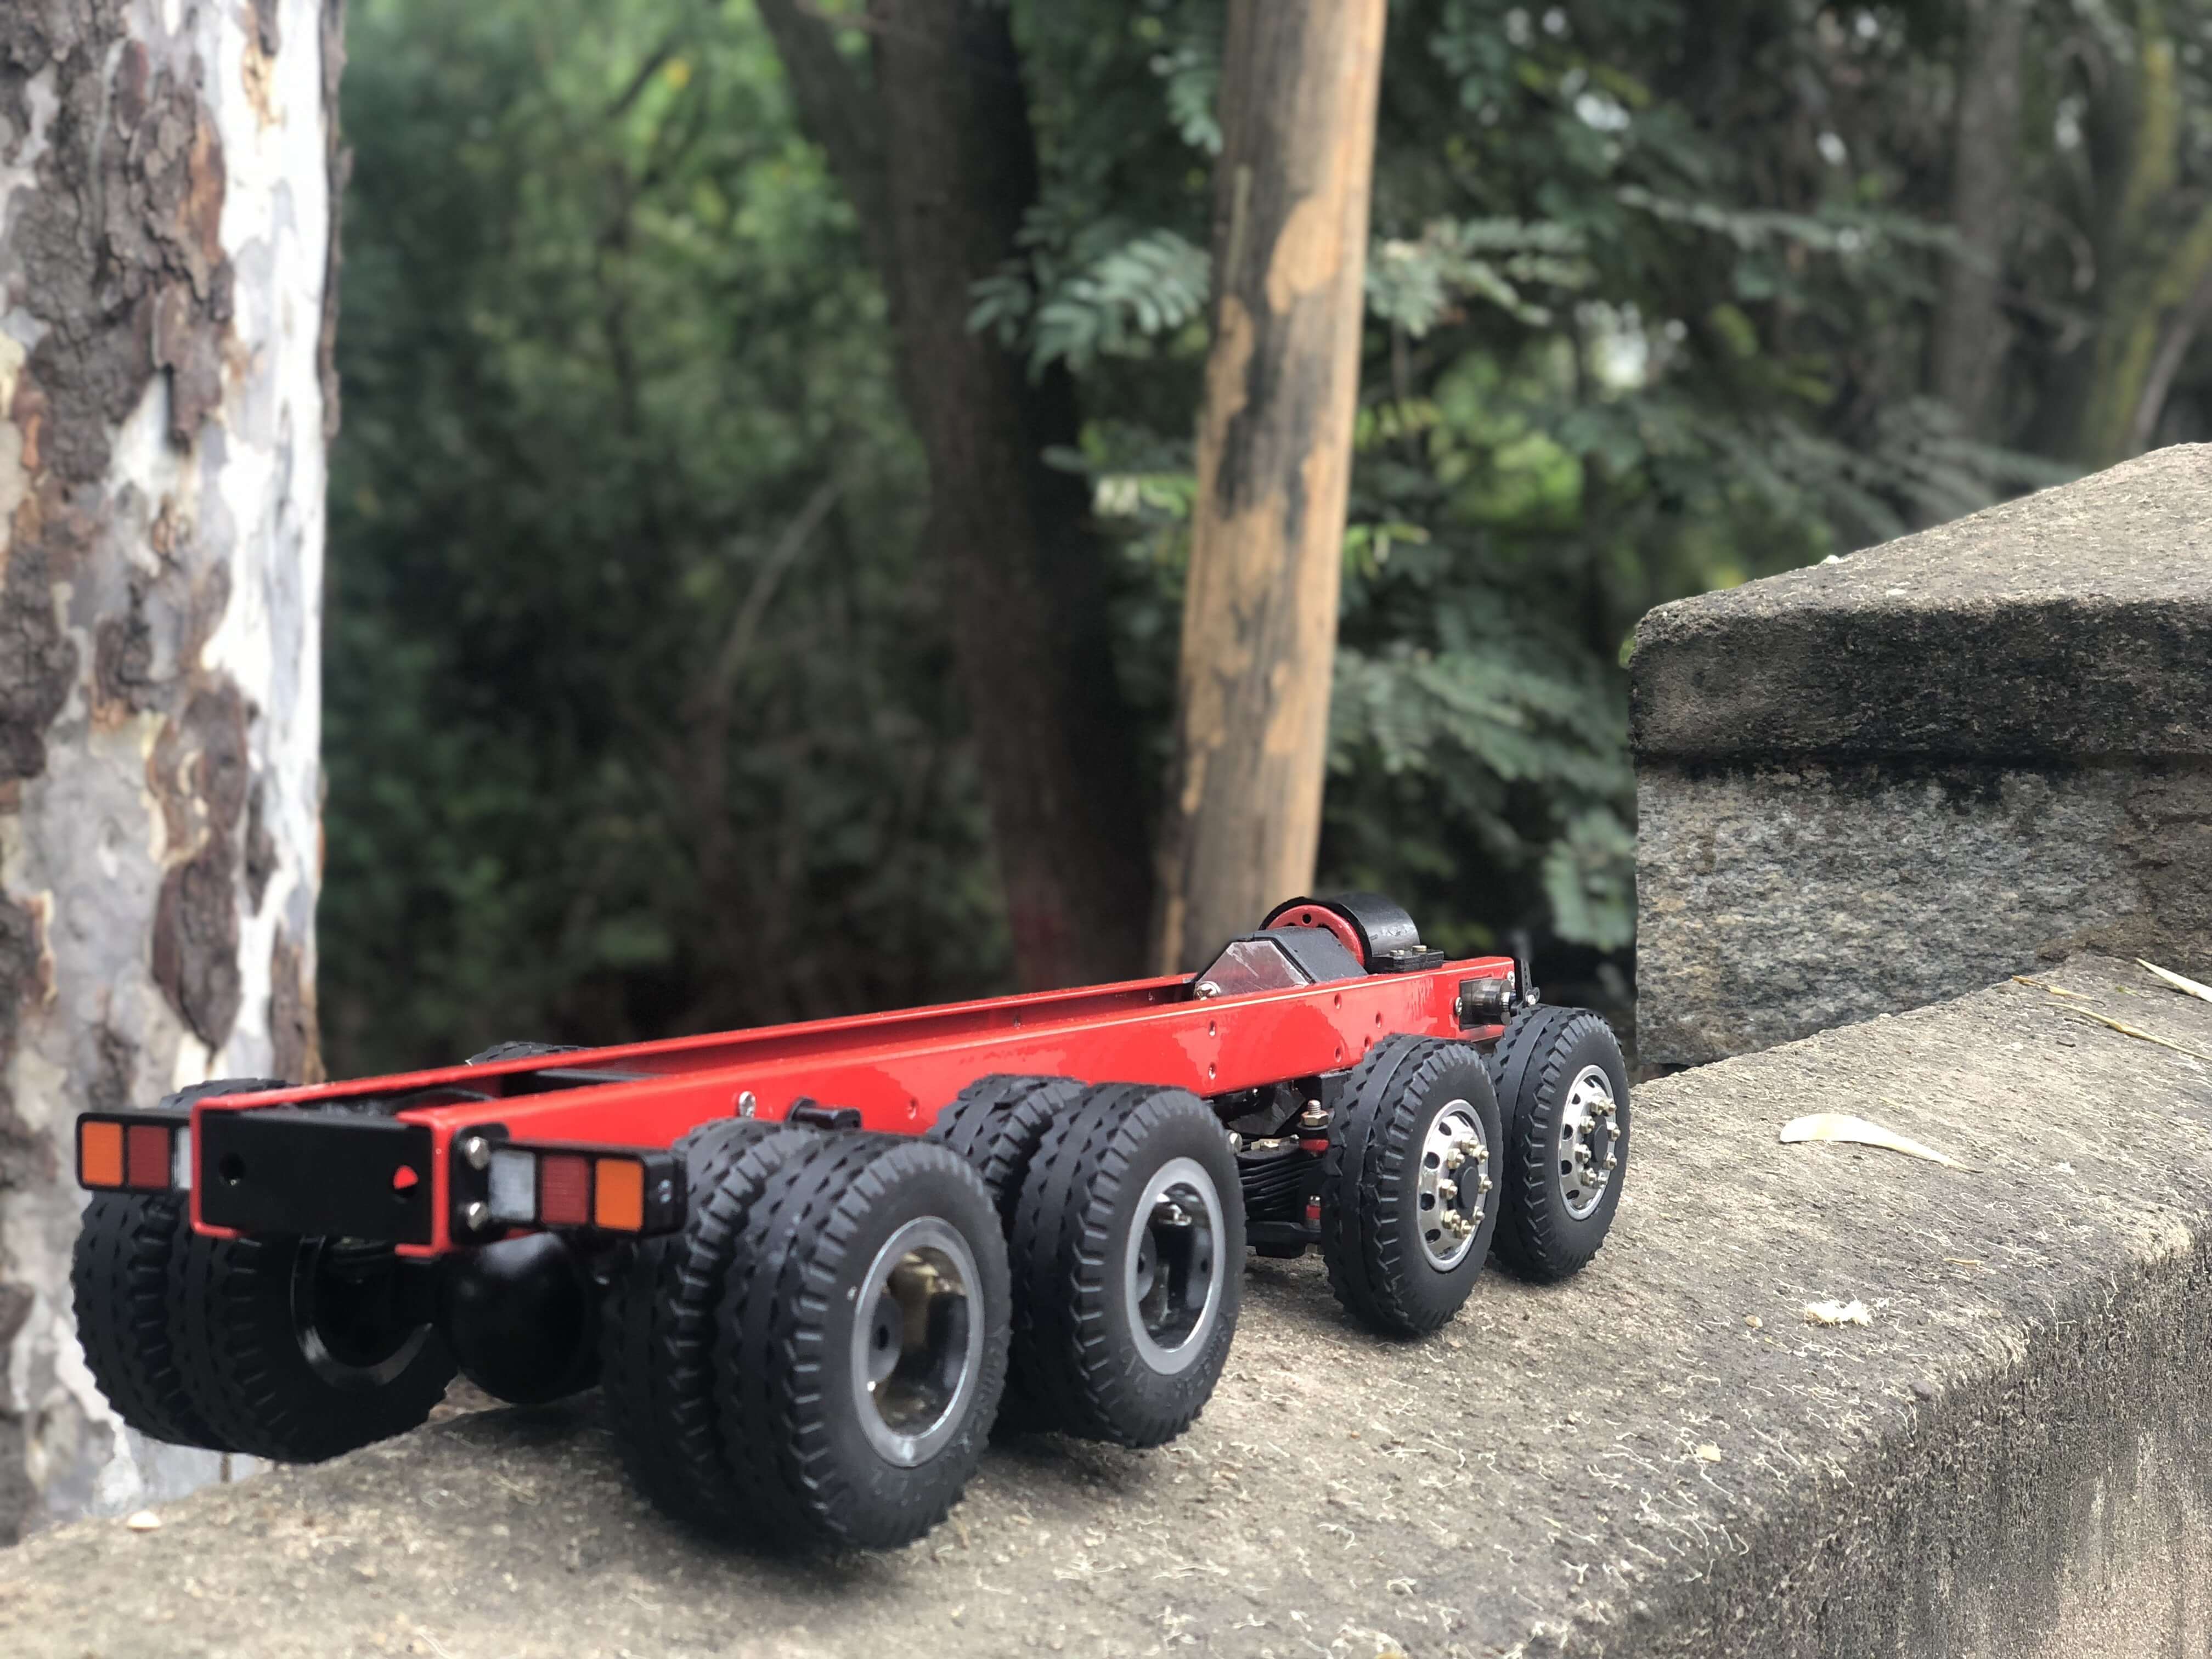 12 Wheel Chassis with Motor-Gearbox and Steering Servo Rear Multi-Axle Drive (Scale 1:18)